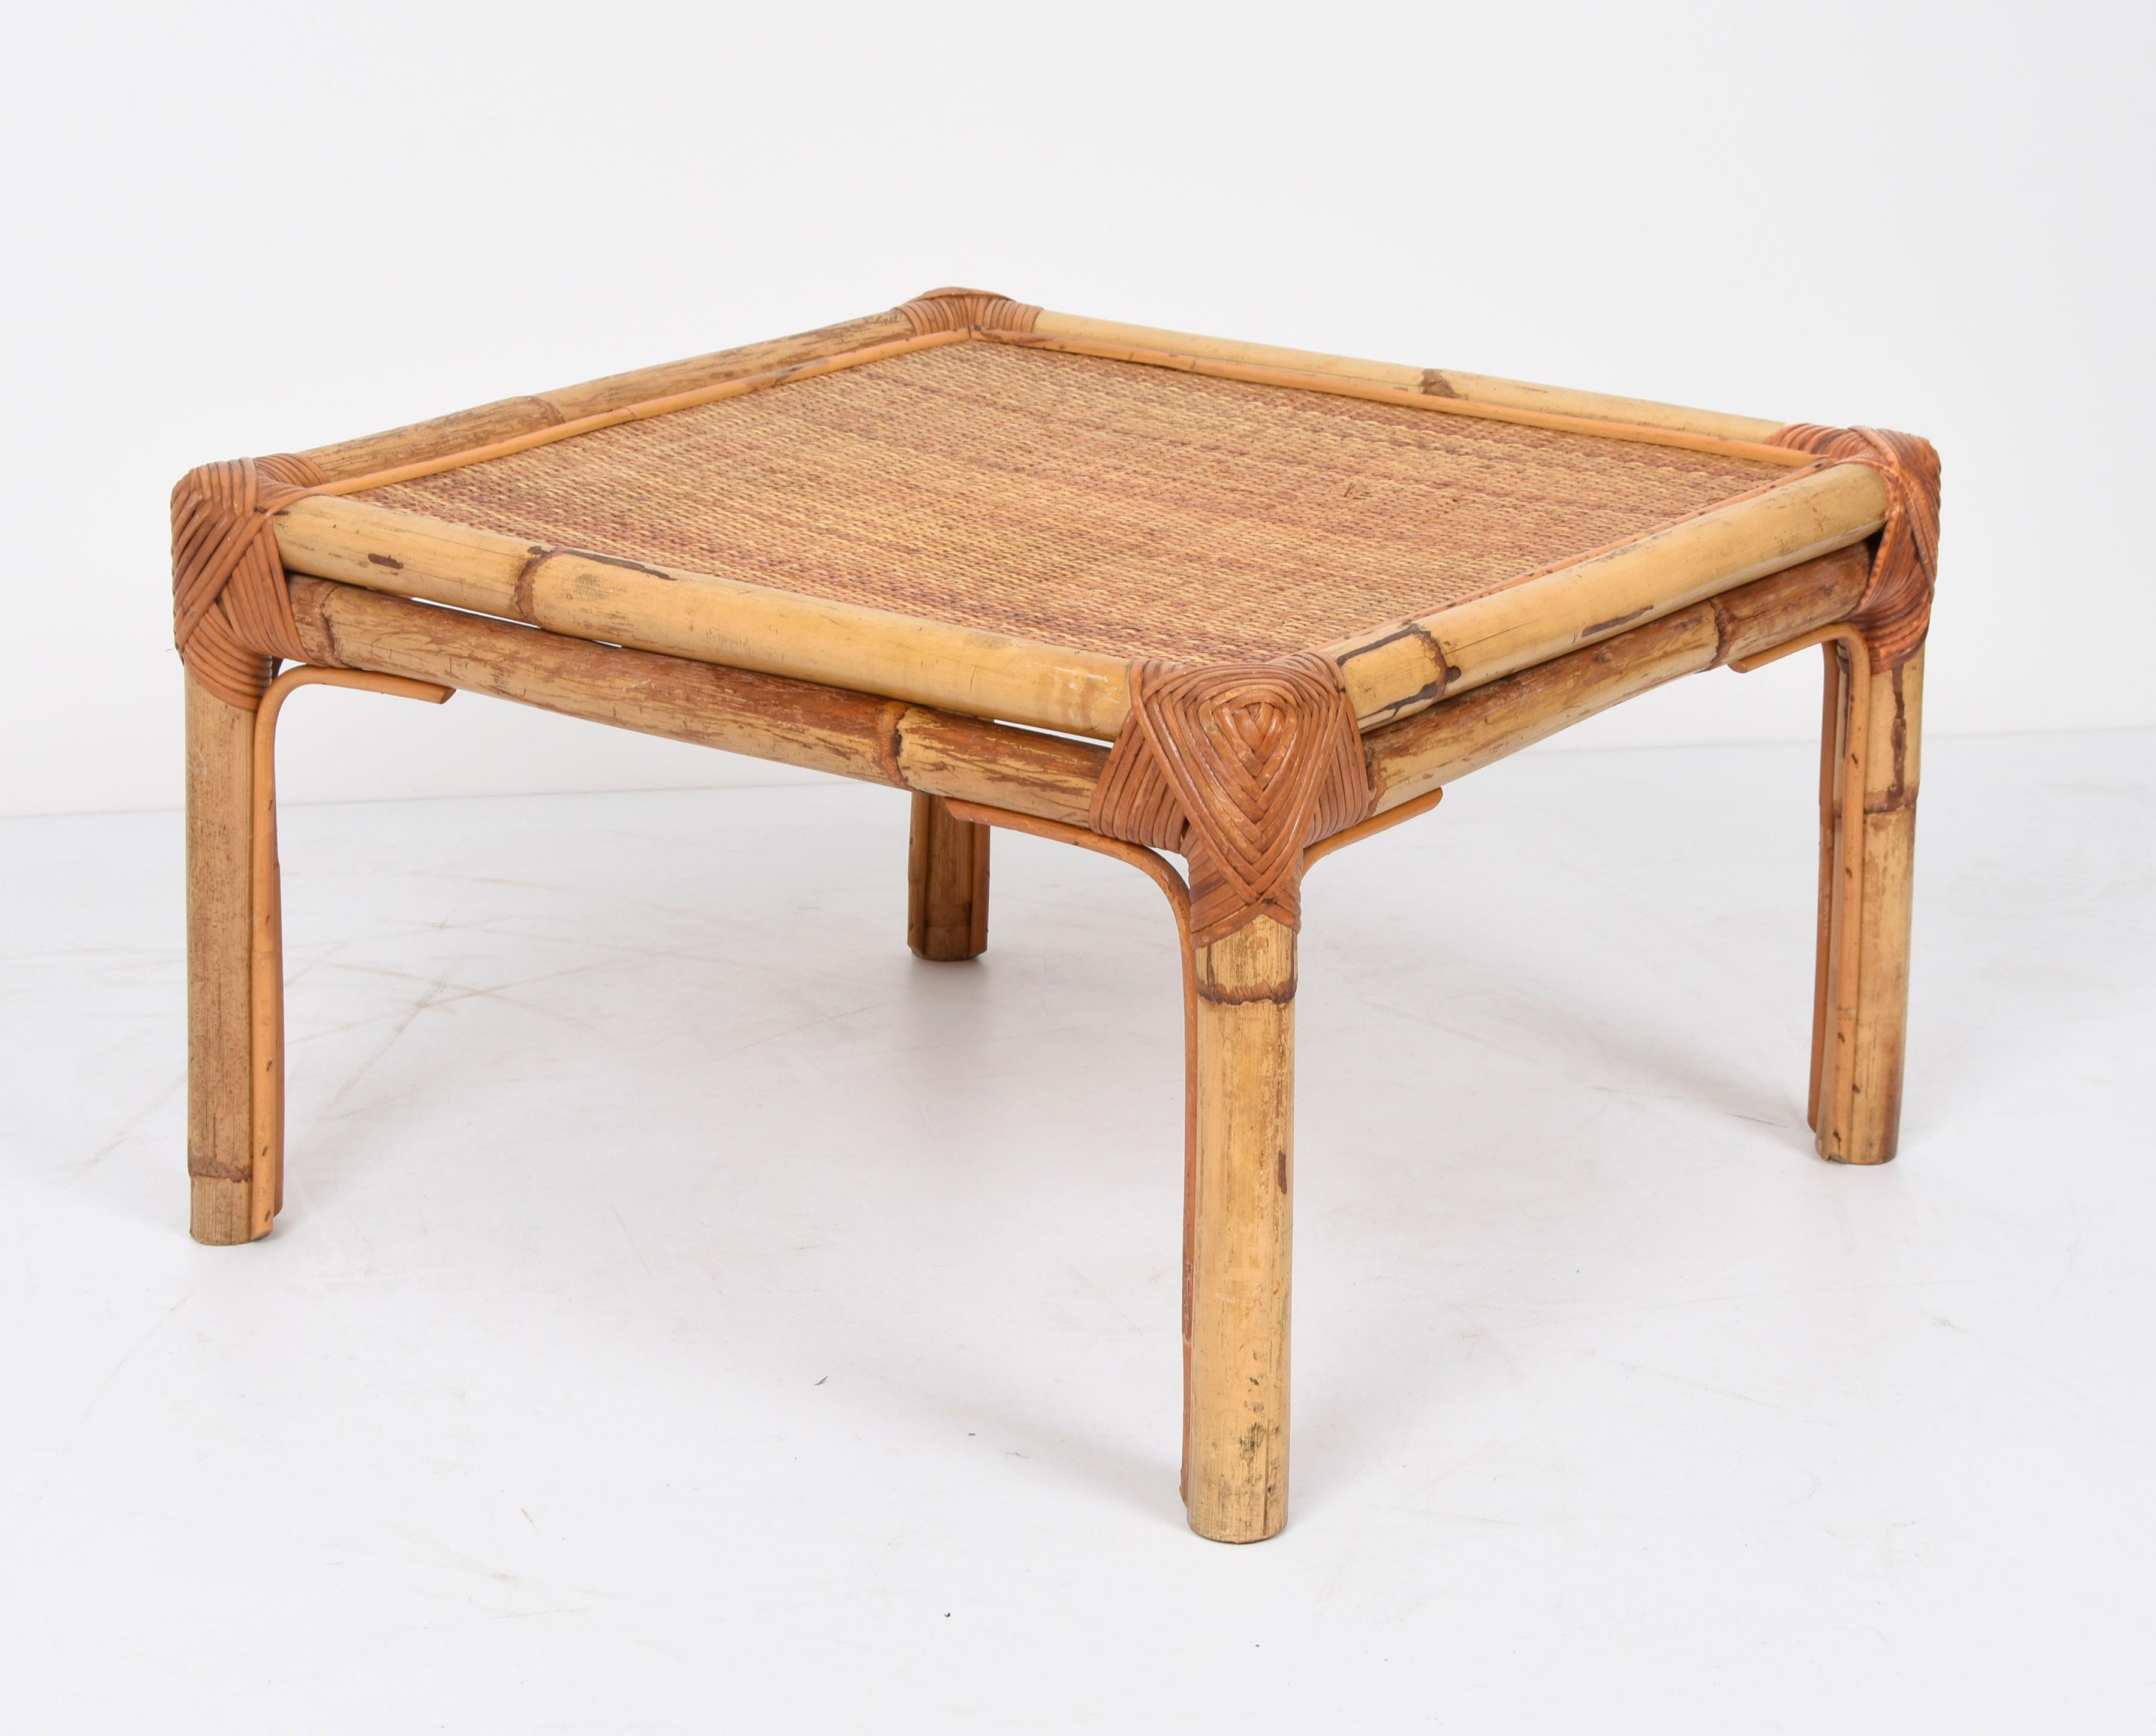 Vivai del Sud Midcentury Italian Squared Bamboo and Rattan Coffee Table, 1970 For Sale 2